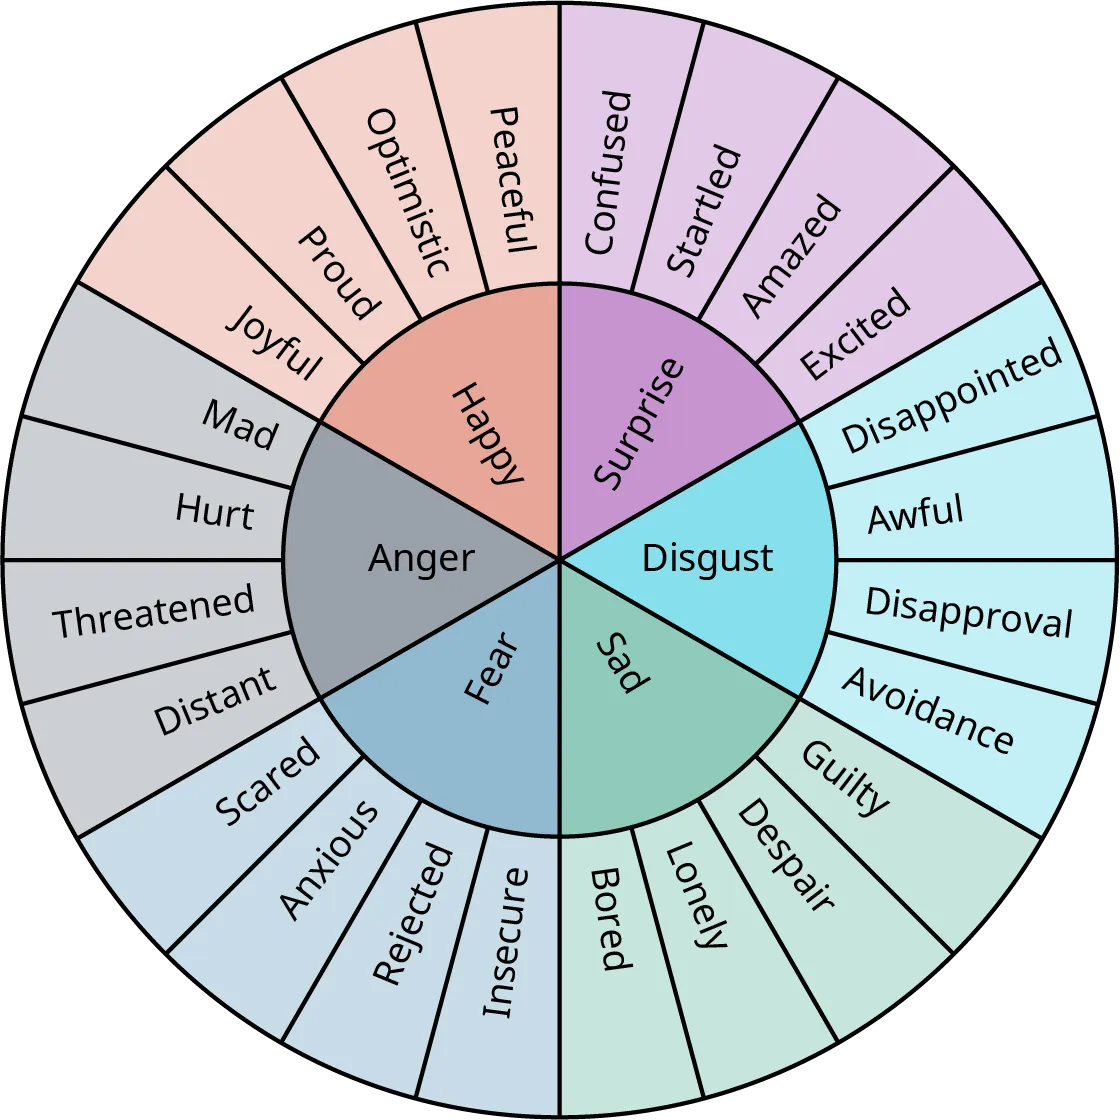 A large circle with a smaller interior circle represents the emotion wheel. The inner circle is divided into the 5 basic colors to represent the emotions of fear, anger, surprise, happy, disgust, and sad. The outer circle is divided into 20 smaller sections that are color-aligned with the inner circle to show how emotions are related. Fear is related to scared, anxious, rejected, unsure. Anger is related to mad, hurt, threatened, and distant. Happy is related to joyful, proud, optimistic, and peaceful. Disgust is related to disappointed, awful, disapproval, avoidance. Sad is related to guilty, despair, lonely and bored.